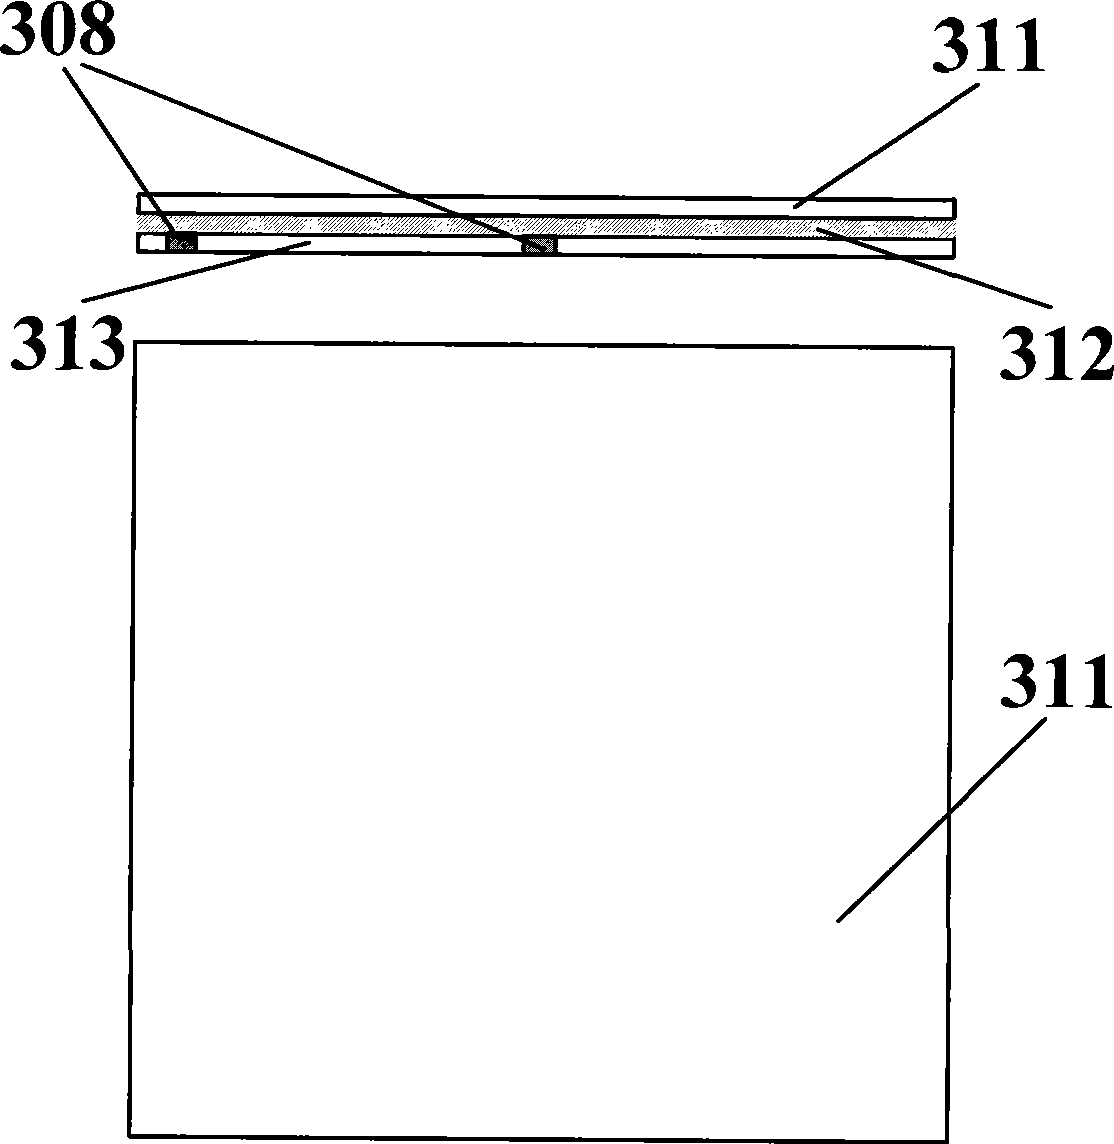 Multi-chip common power supply/grounding structure for printed circuit board